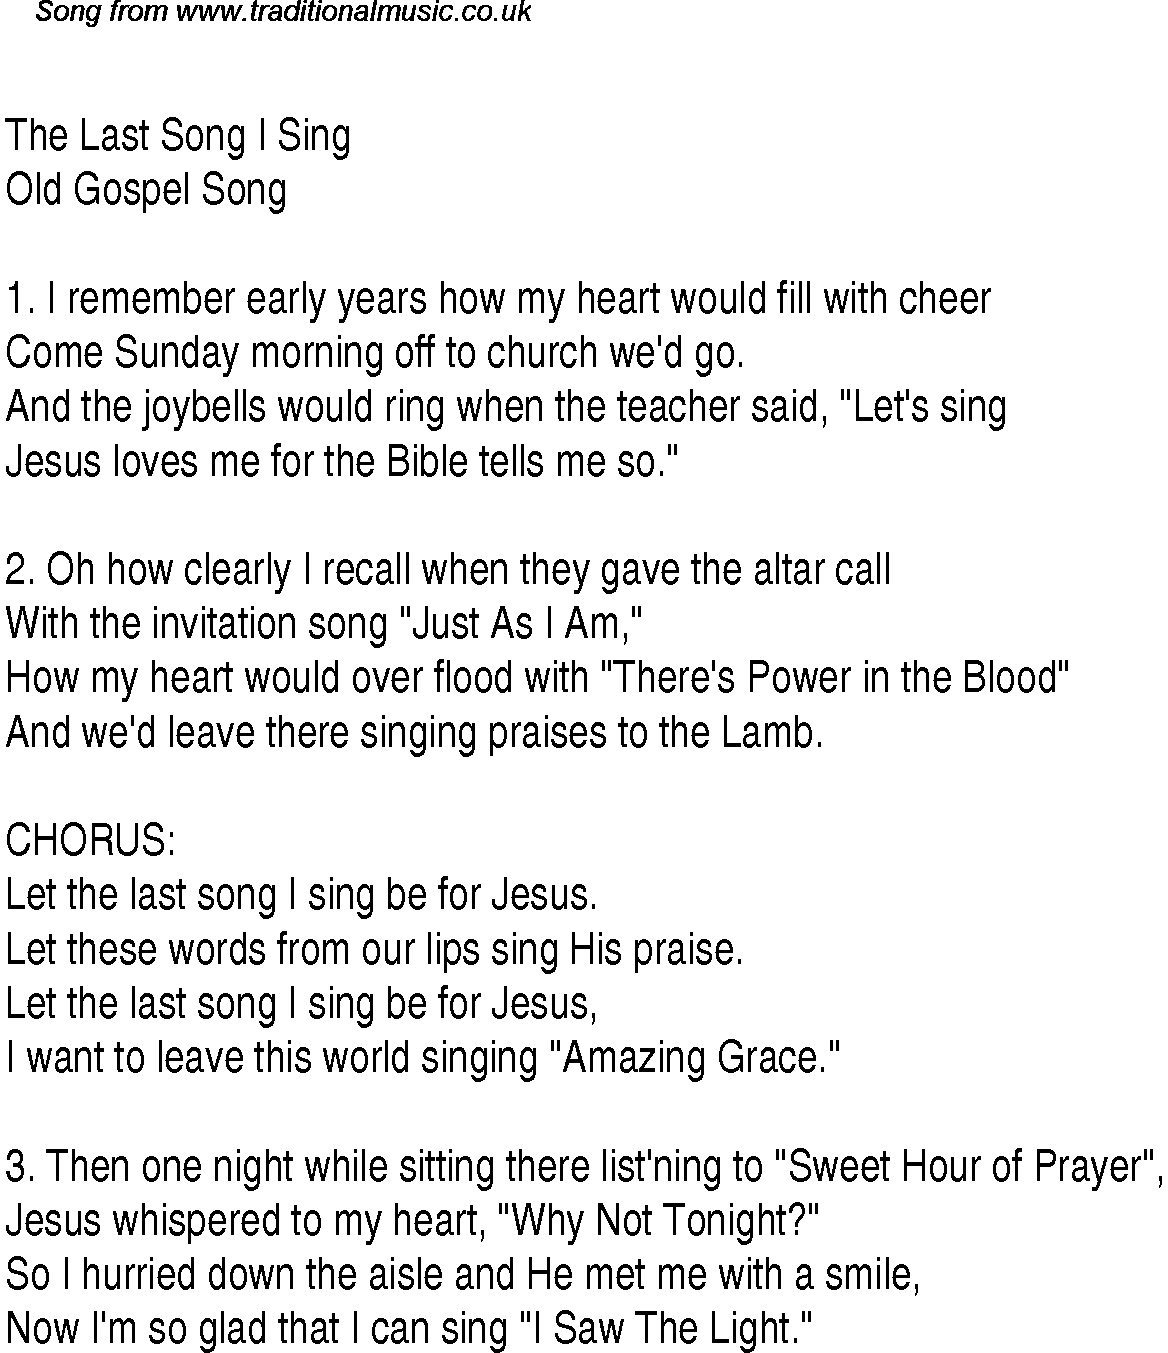 Gospel Song: the-last-song-i-sing, lyrics and chords.